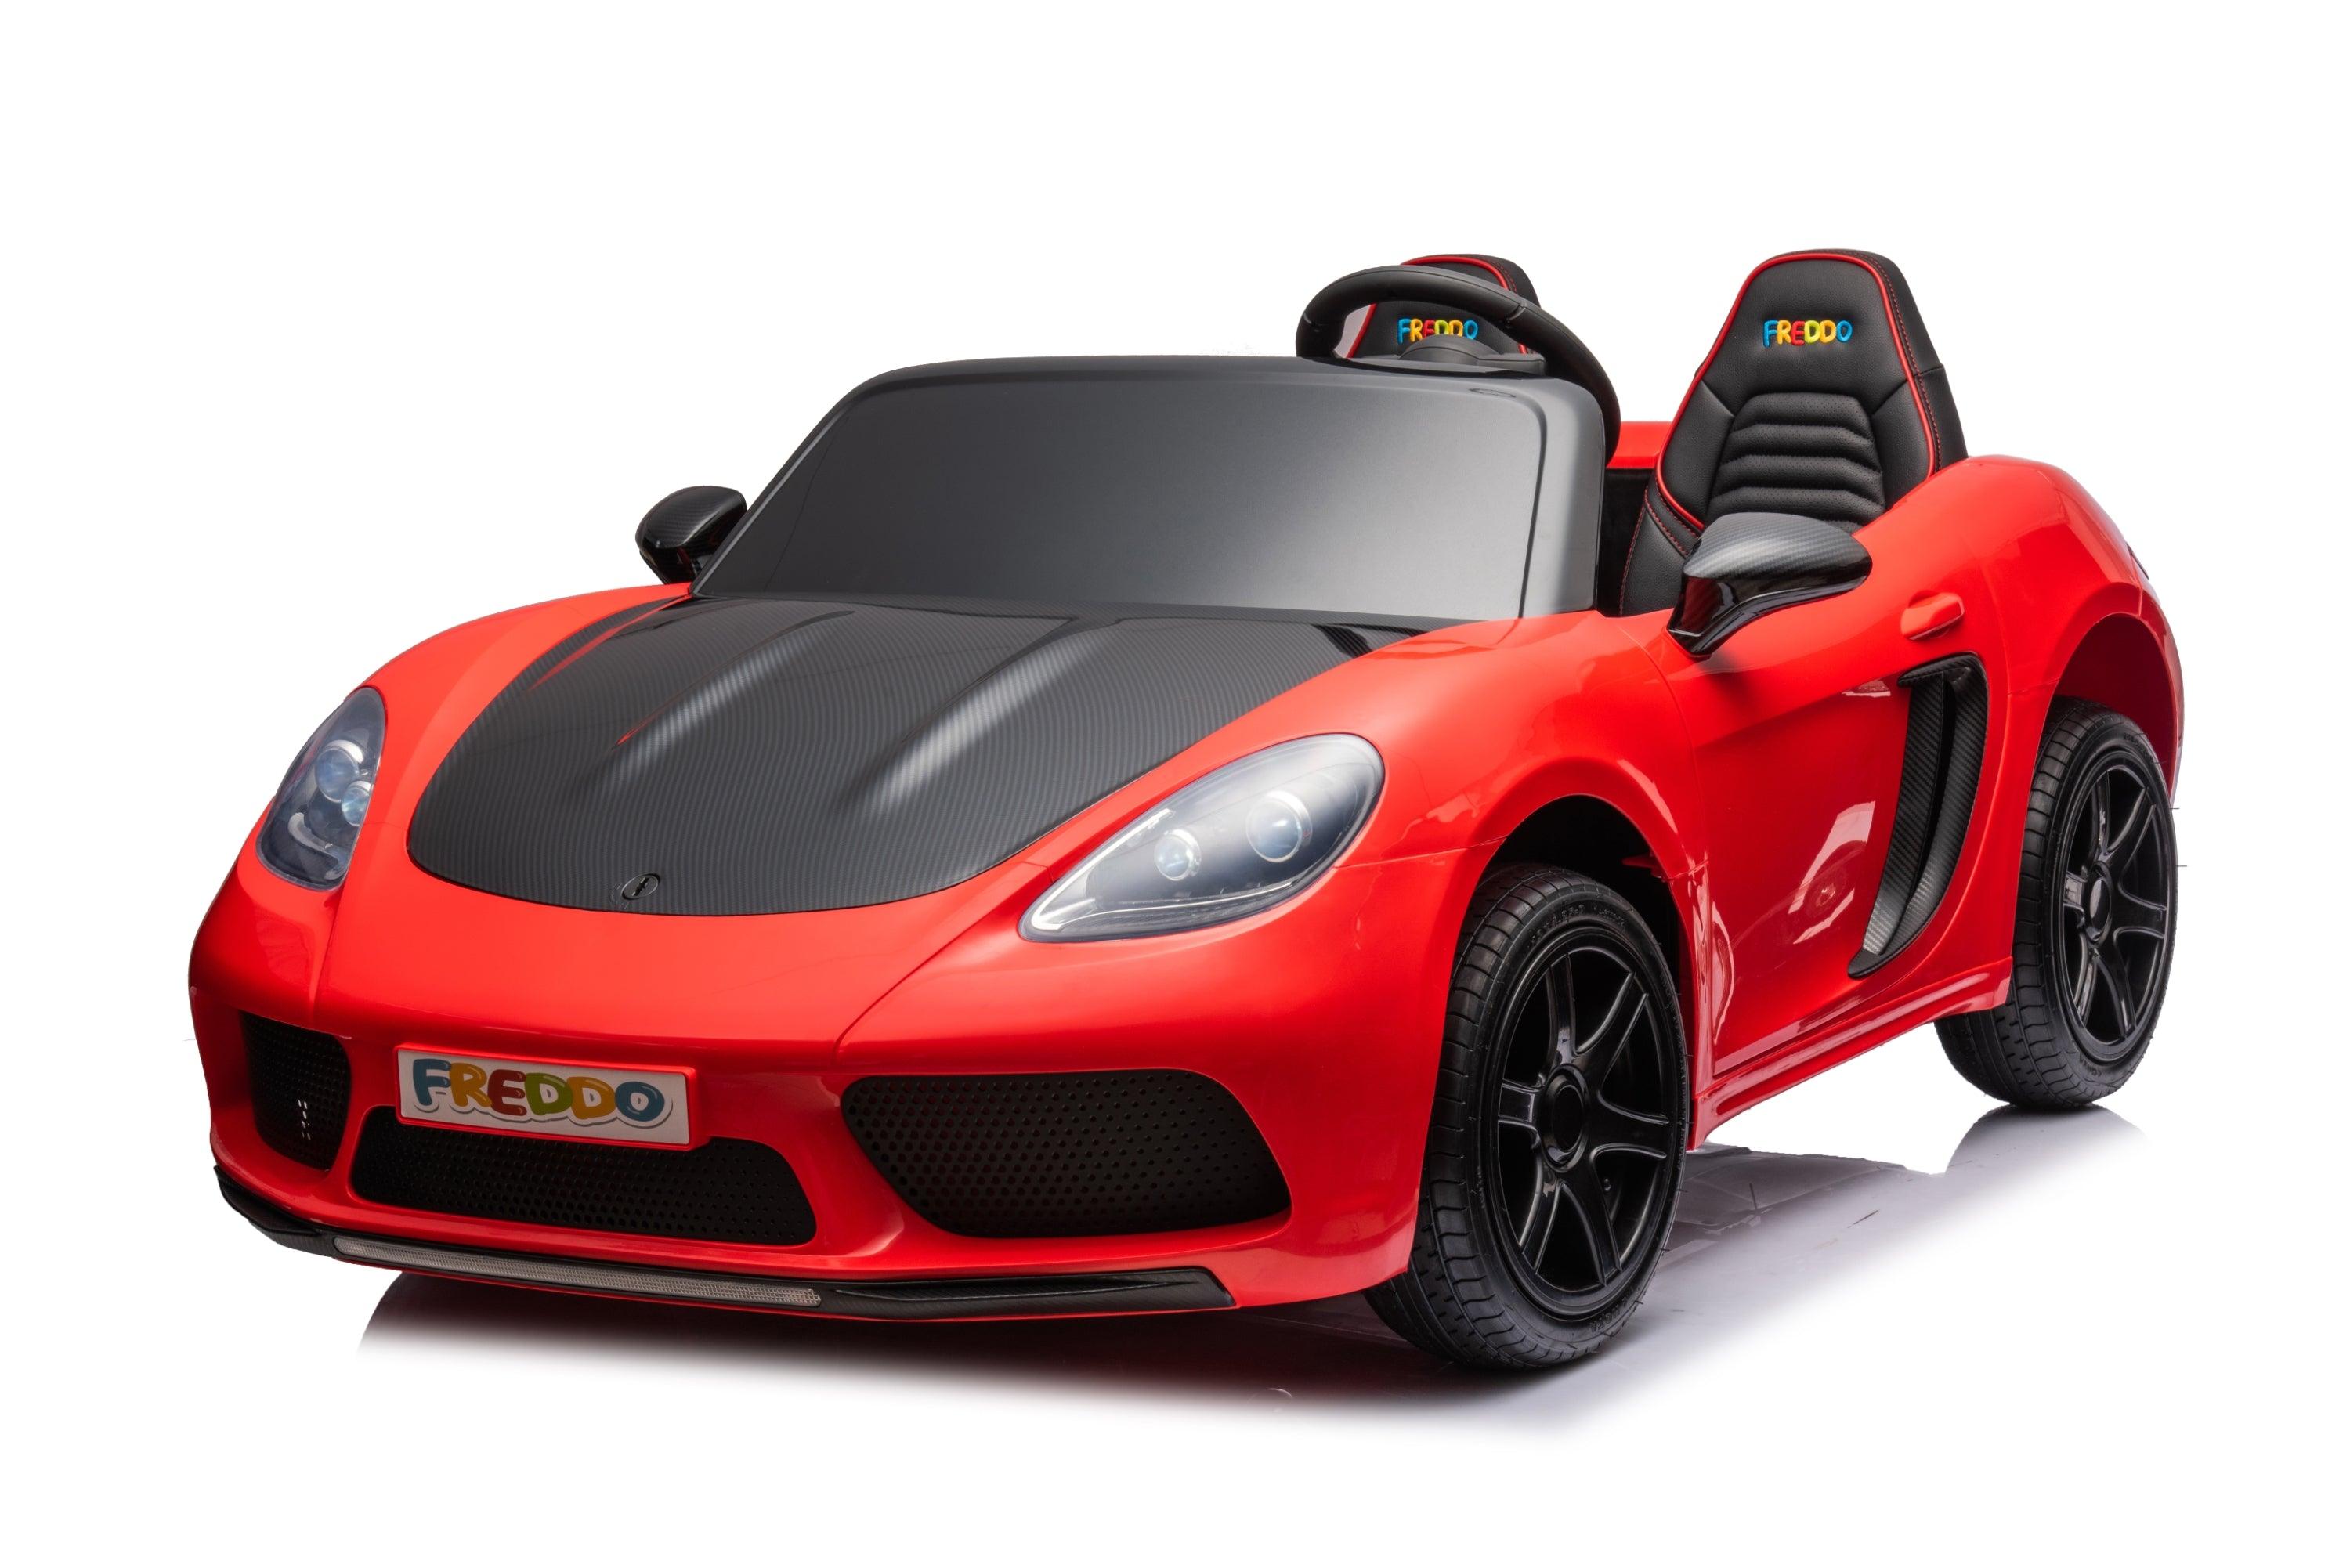 48V Freddo Rocket: World's Fastest 2-Seater Kids' Ride-On with Advanced Brushless Motor & Precision Differential - DTI Direct USA